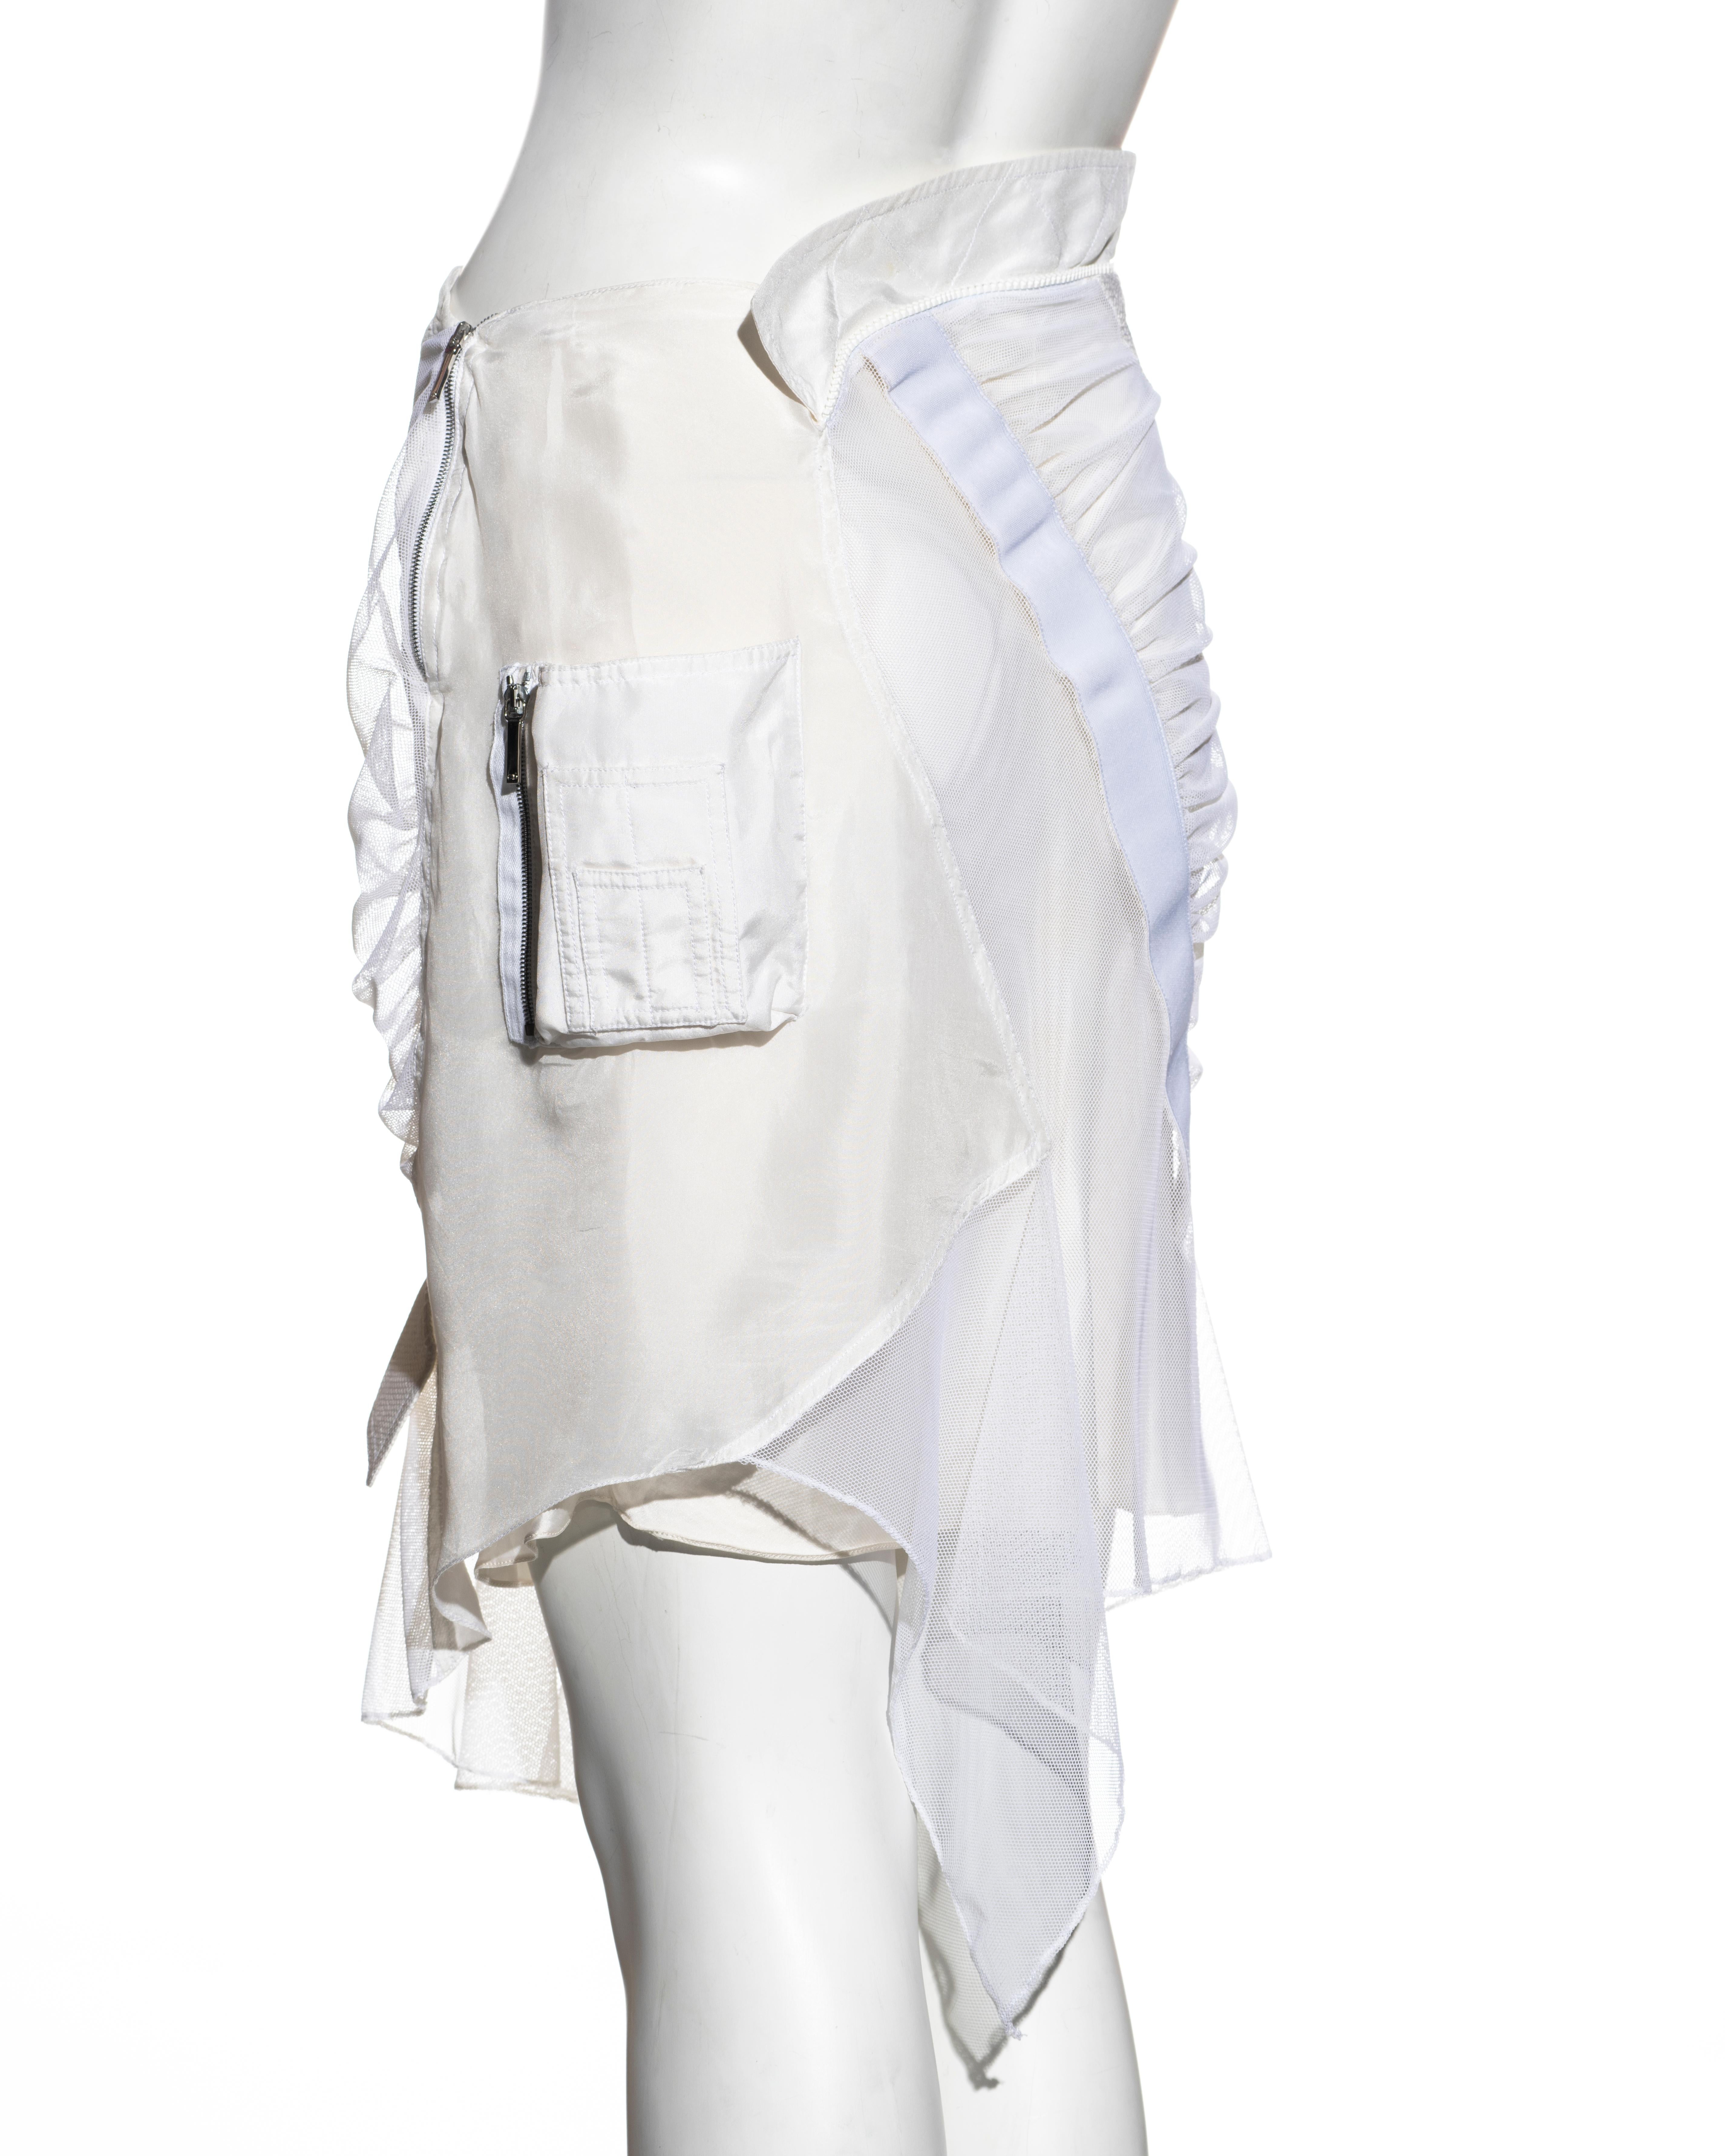 Christian Dior by John Galliano white mesh and silk deconstructed skirt,  ss 2002 1